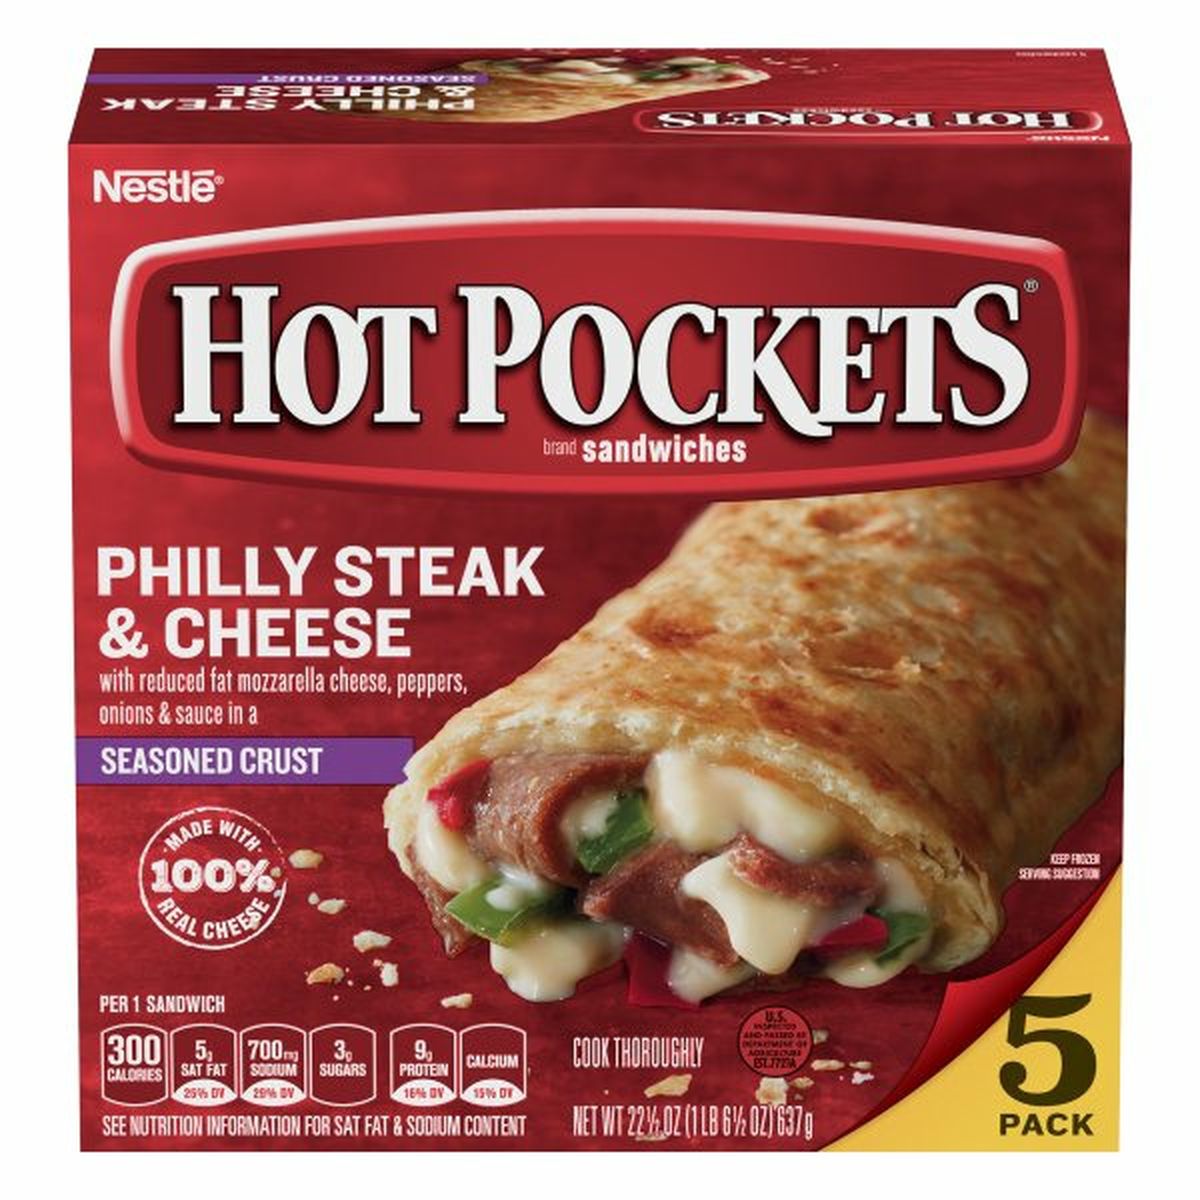 Calories in Hot Pockets Sandwiches, Philly Steak & Cheese, 5 Pack